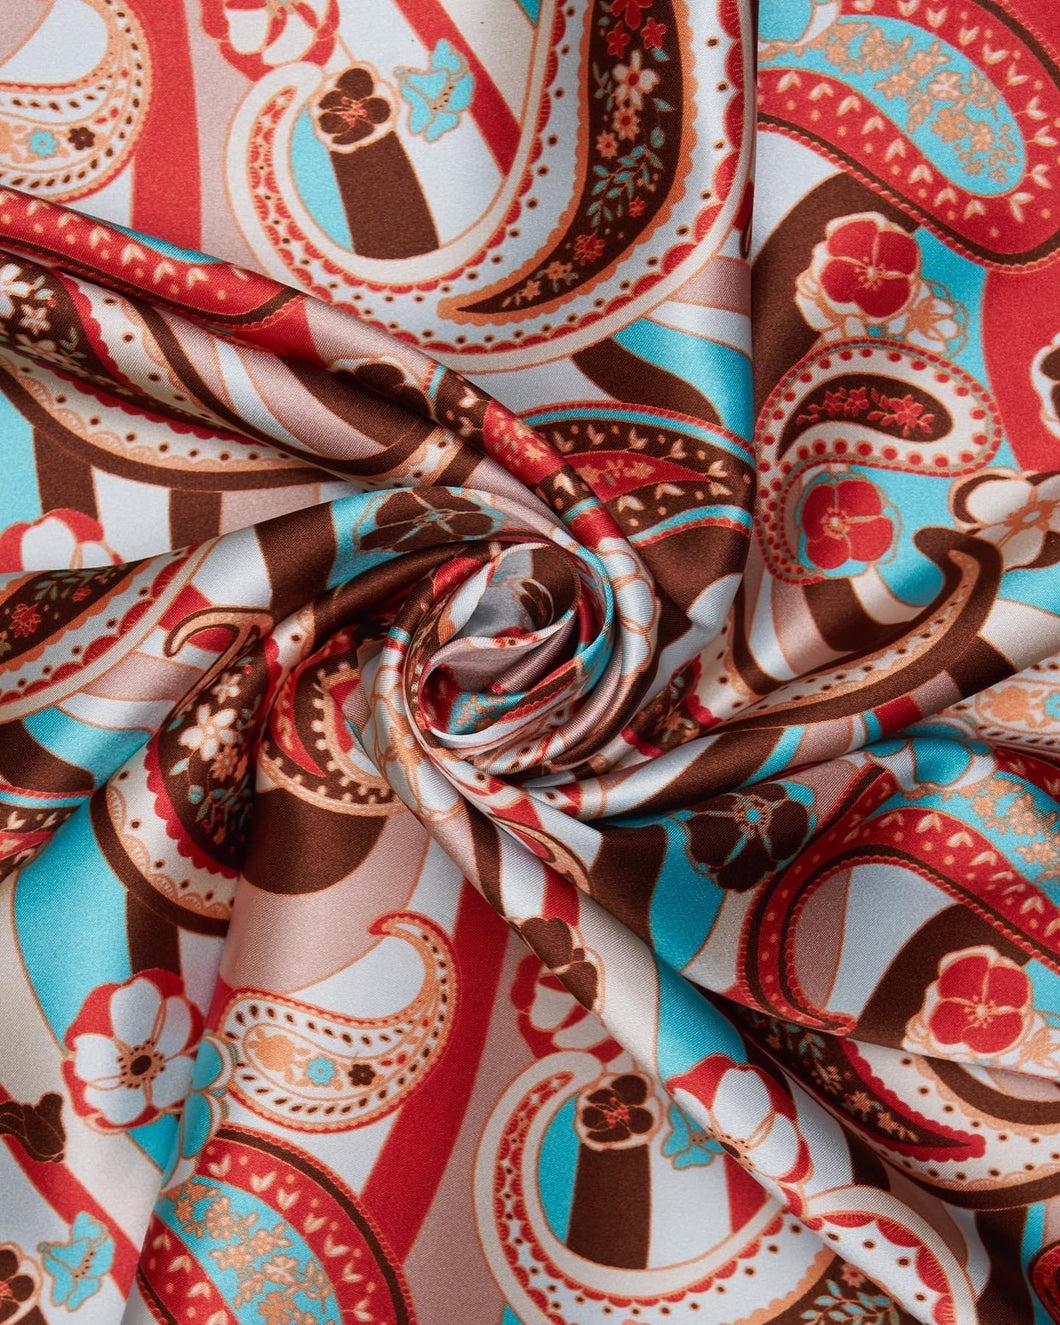 Super cool brown, tan, reds, blues and cream paisley and floral print on a silky charmeuse fabric.